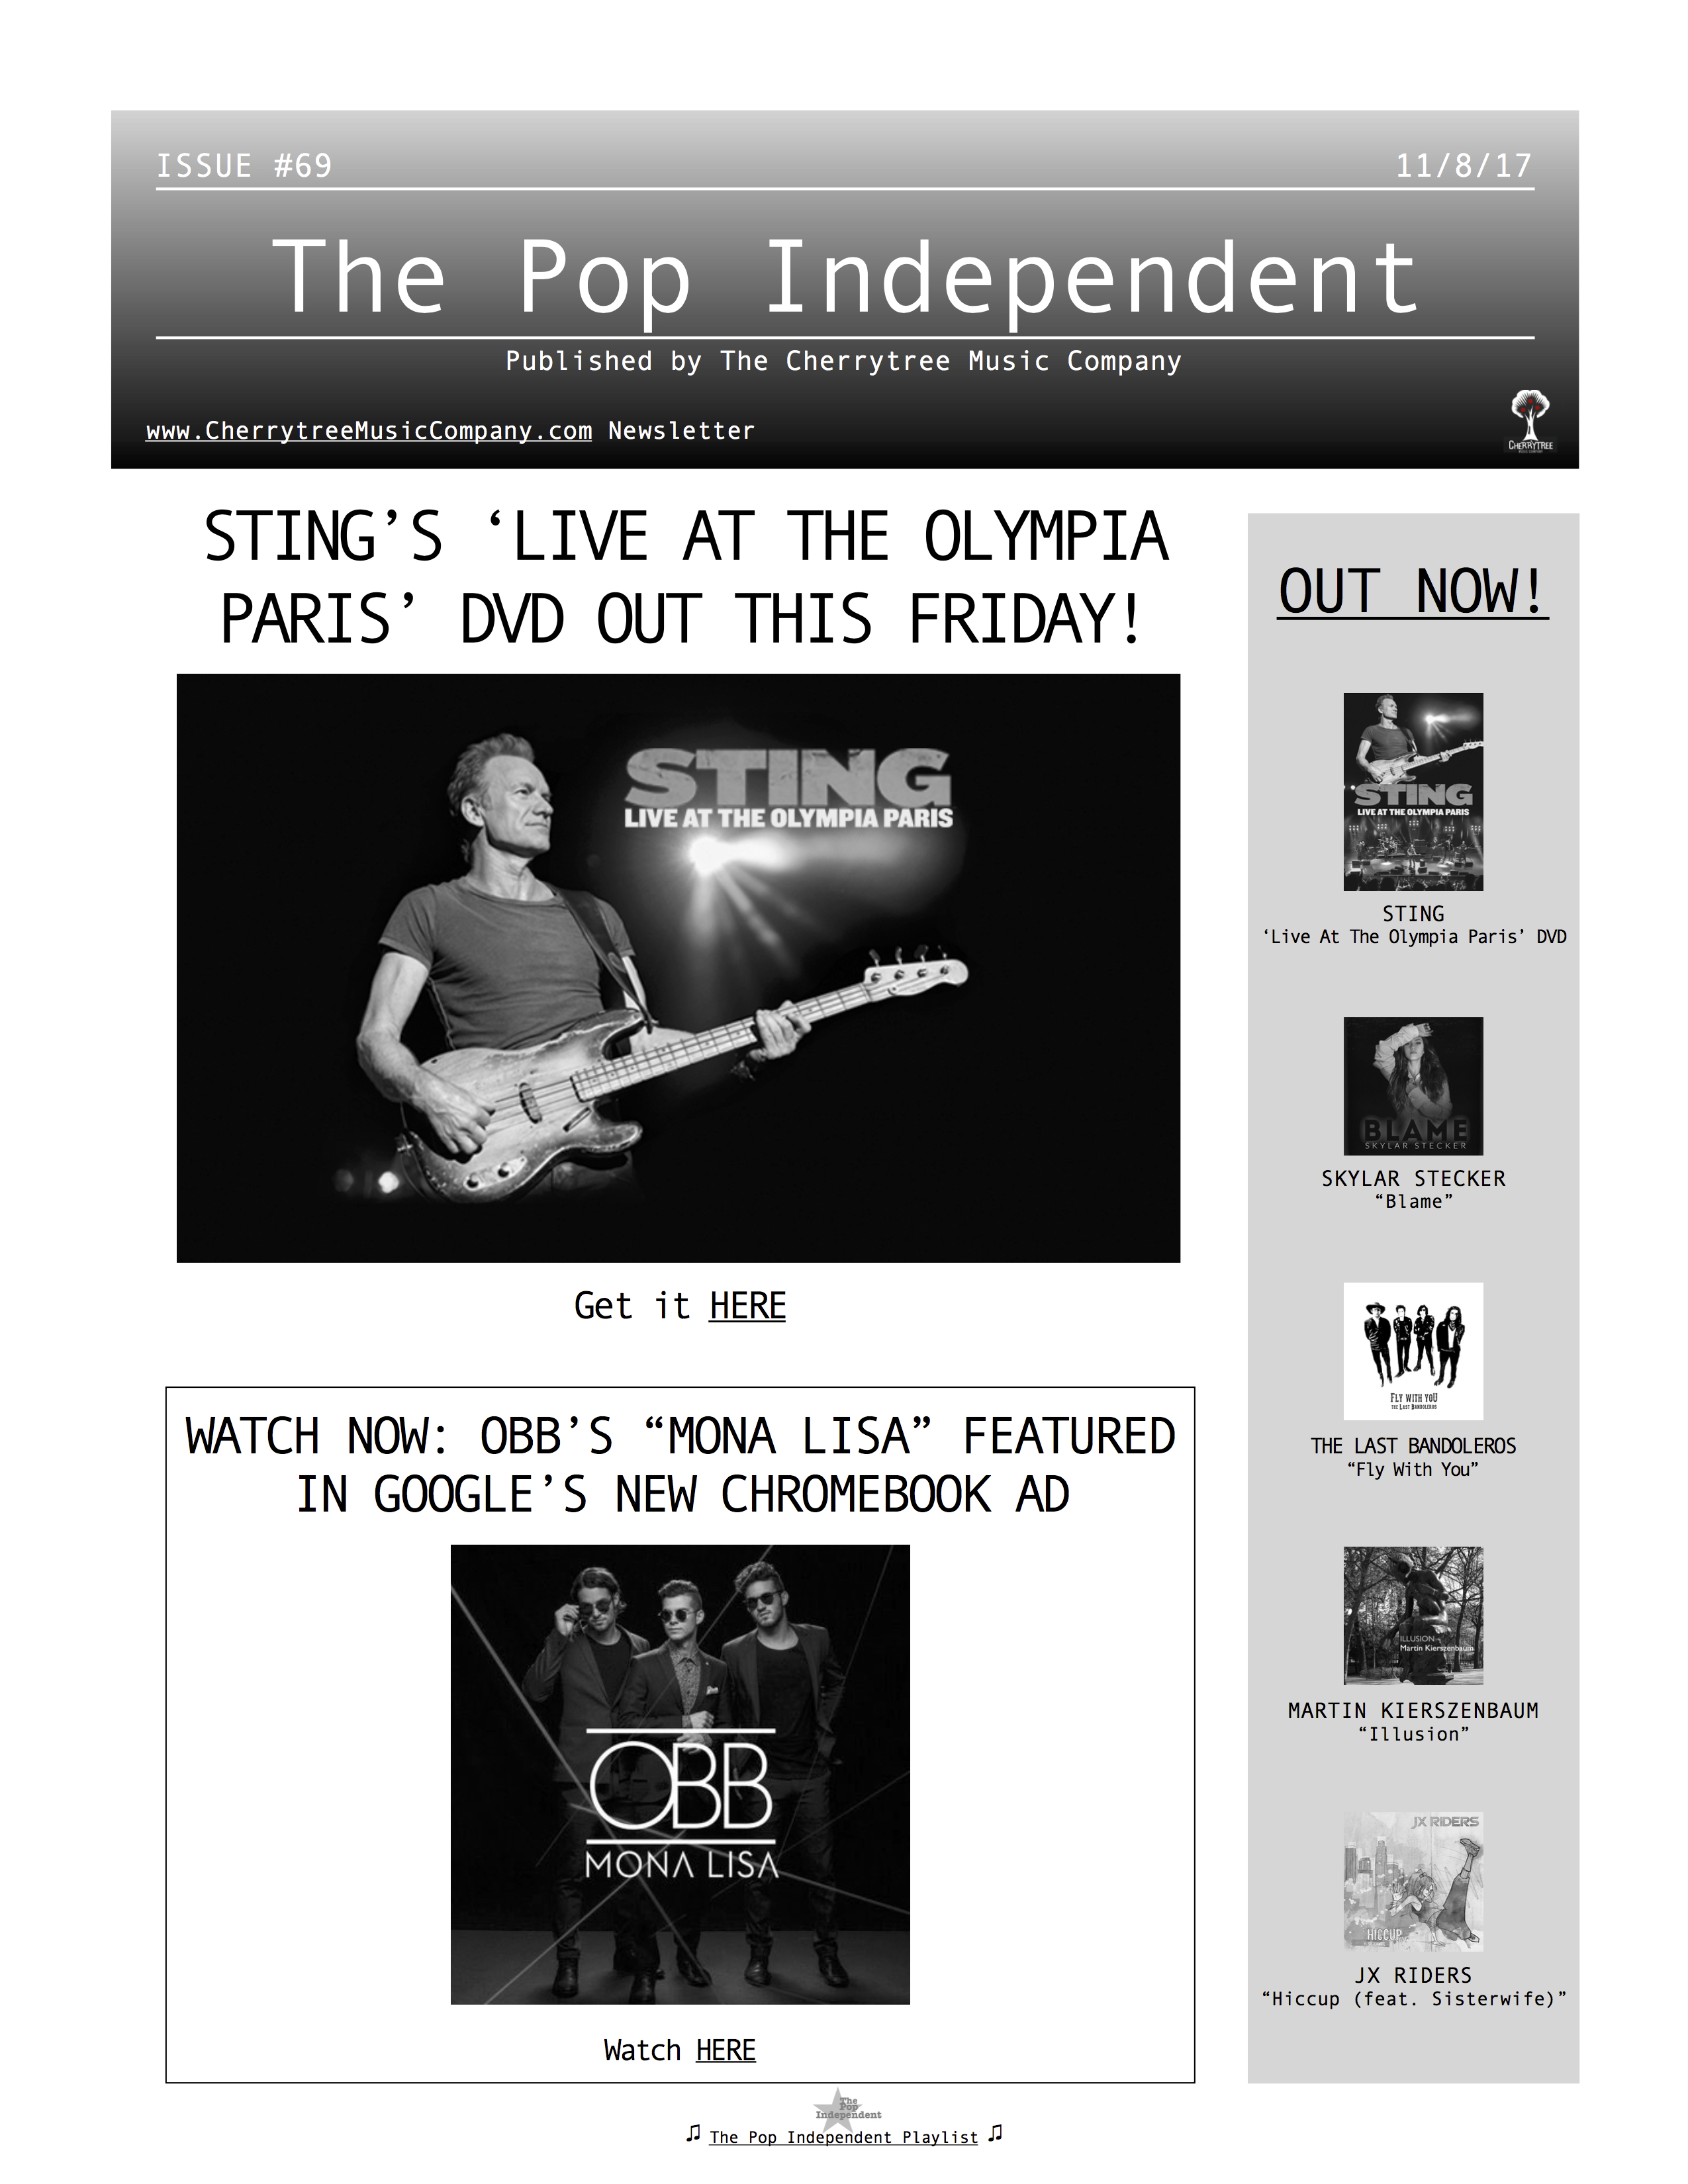 The Pop Independent, issue 69